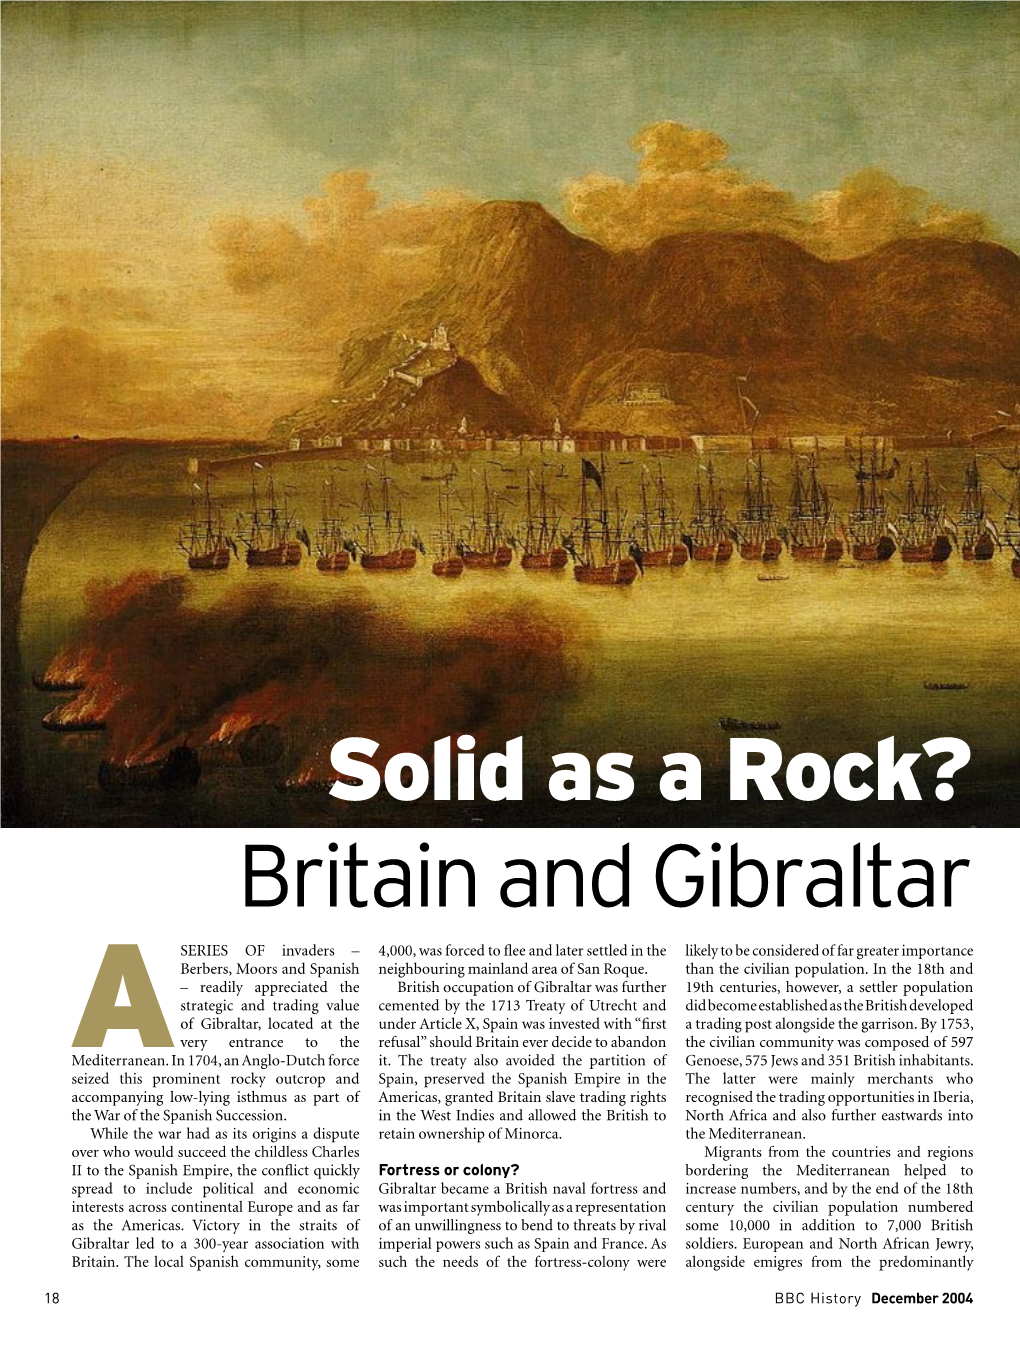 Solid As a Rock? Britain and Gibraltar